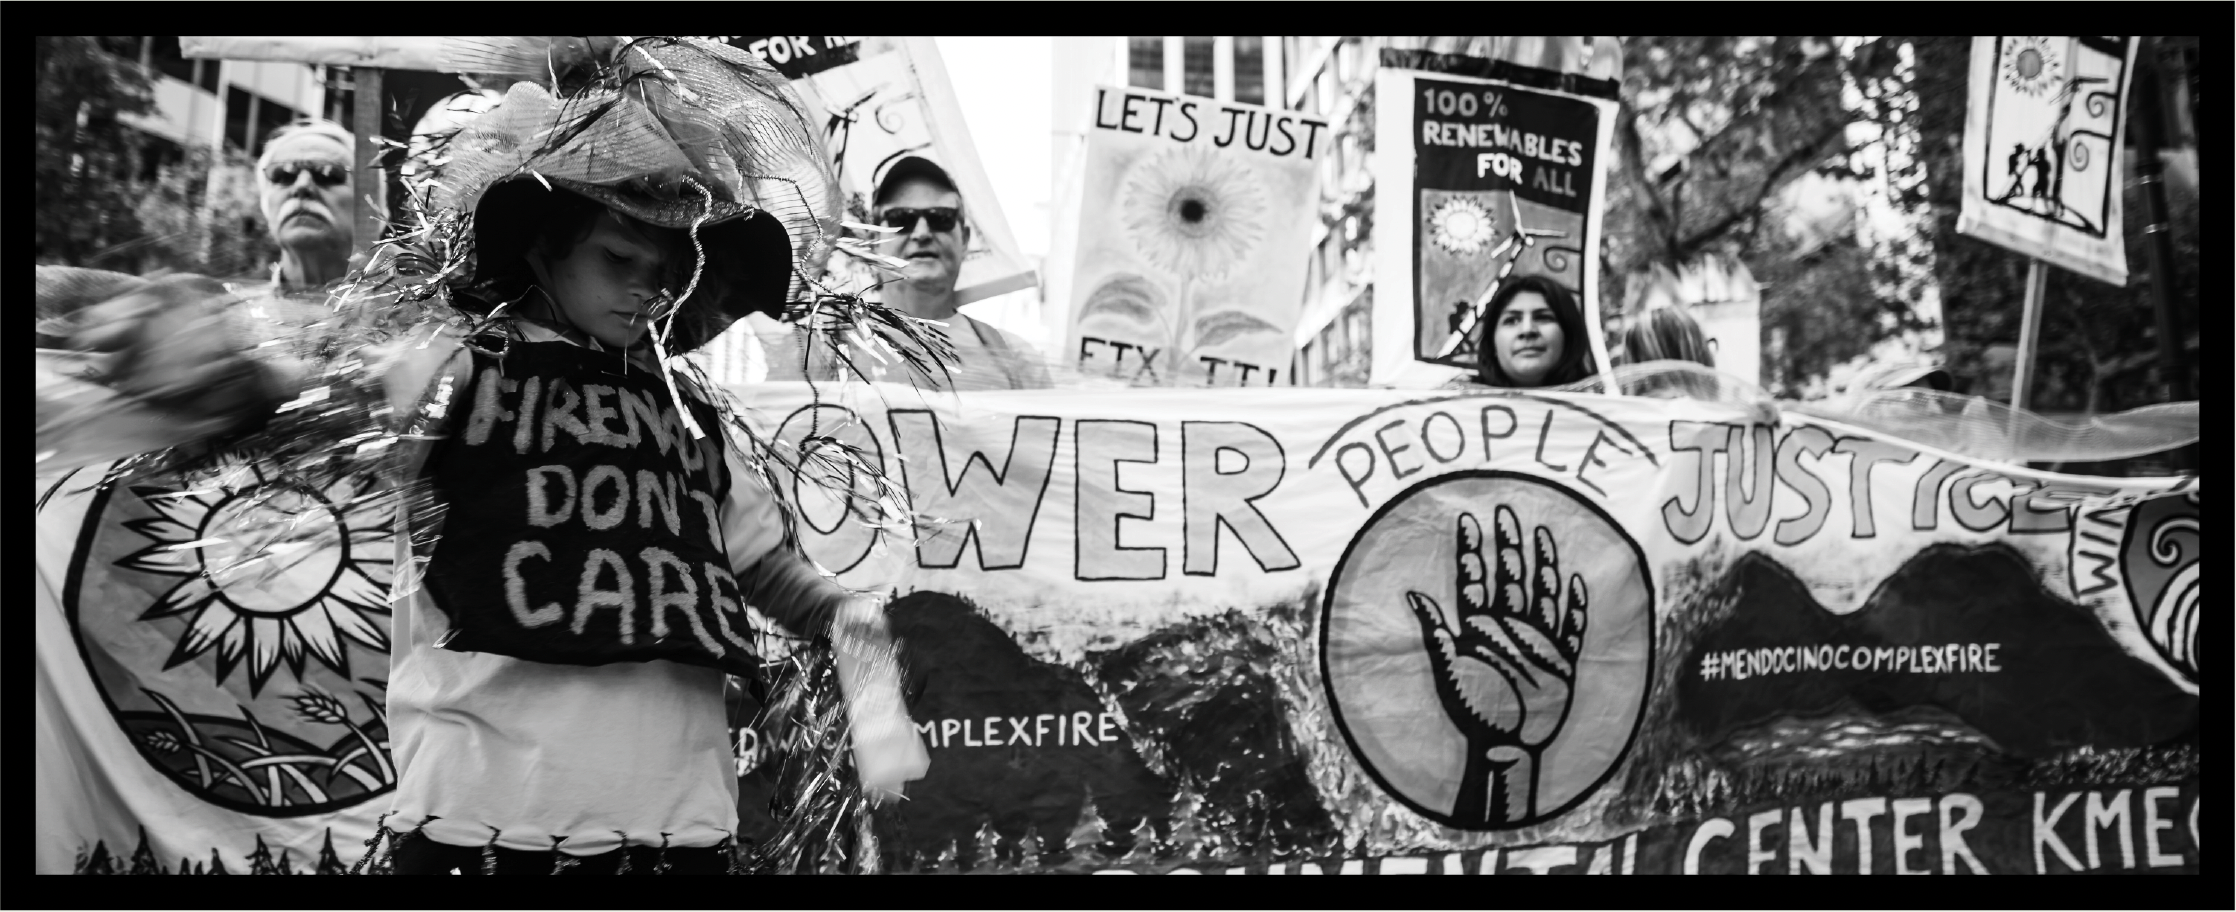 photo via the Climate Justice Alliance (Flickr)